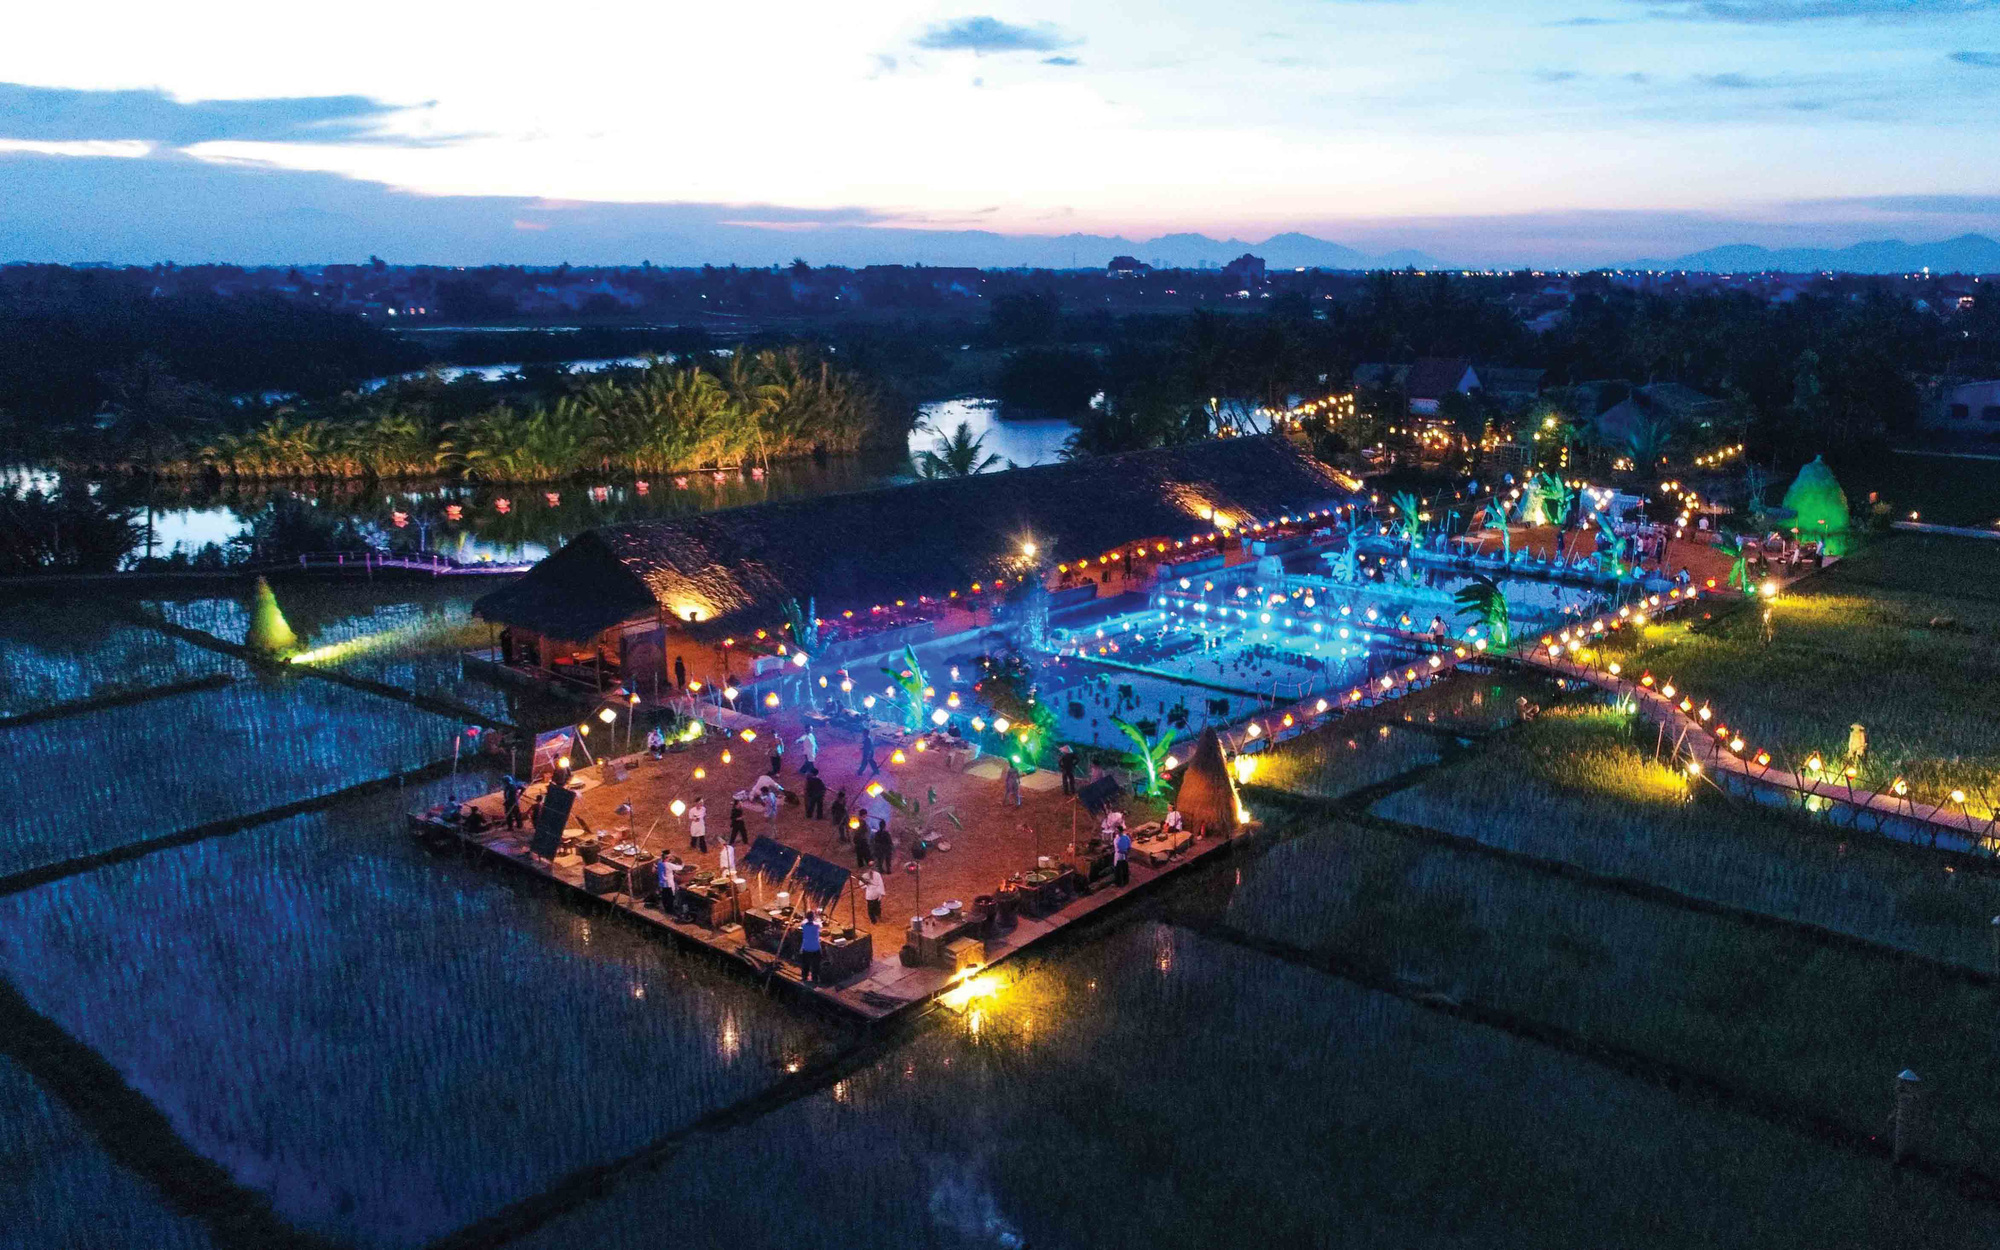 A bird eye's view at night of The Field Restaurant located in Cam Thanh Commune, Hoi An City, Quang Nam Province in central Vietnam. Photo: Thai Ba Dung / Tuoi Tre